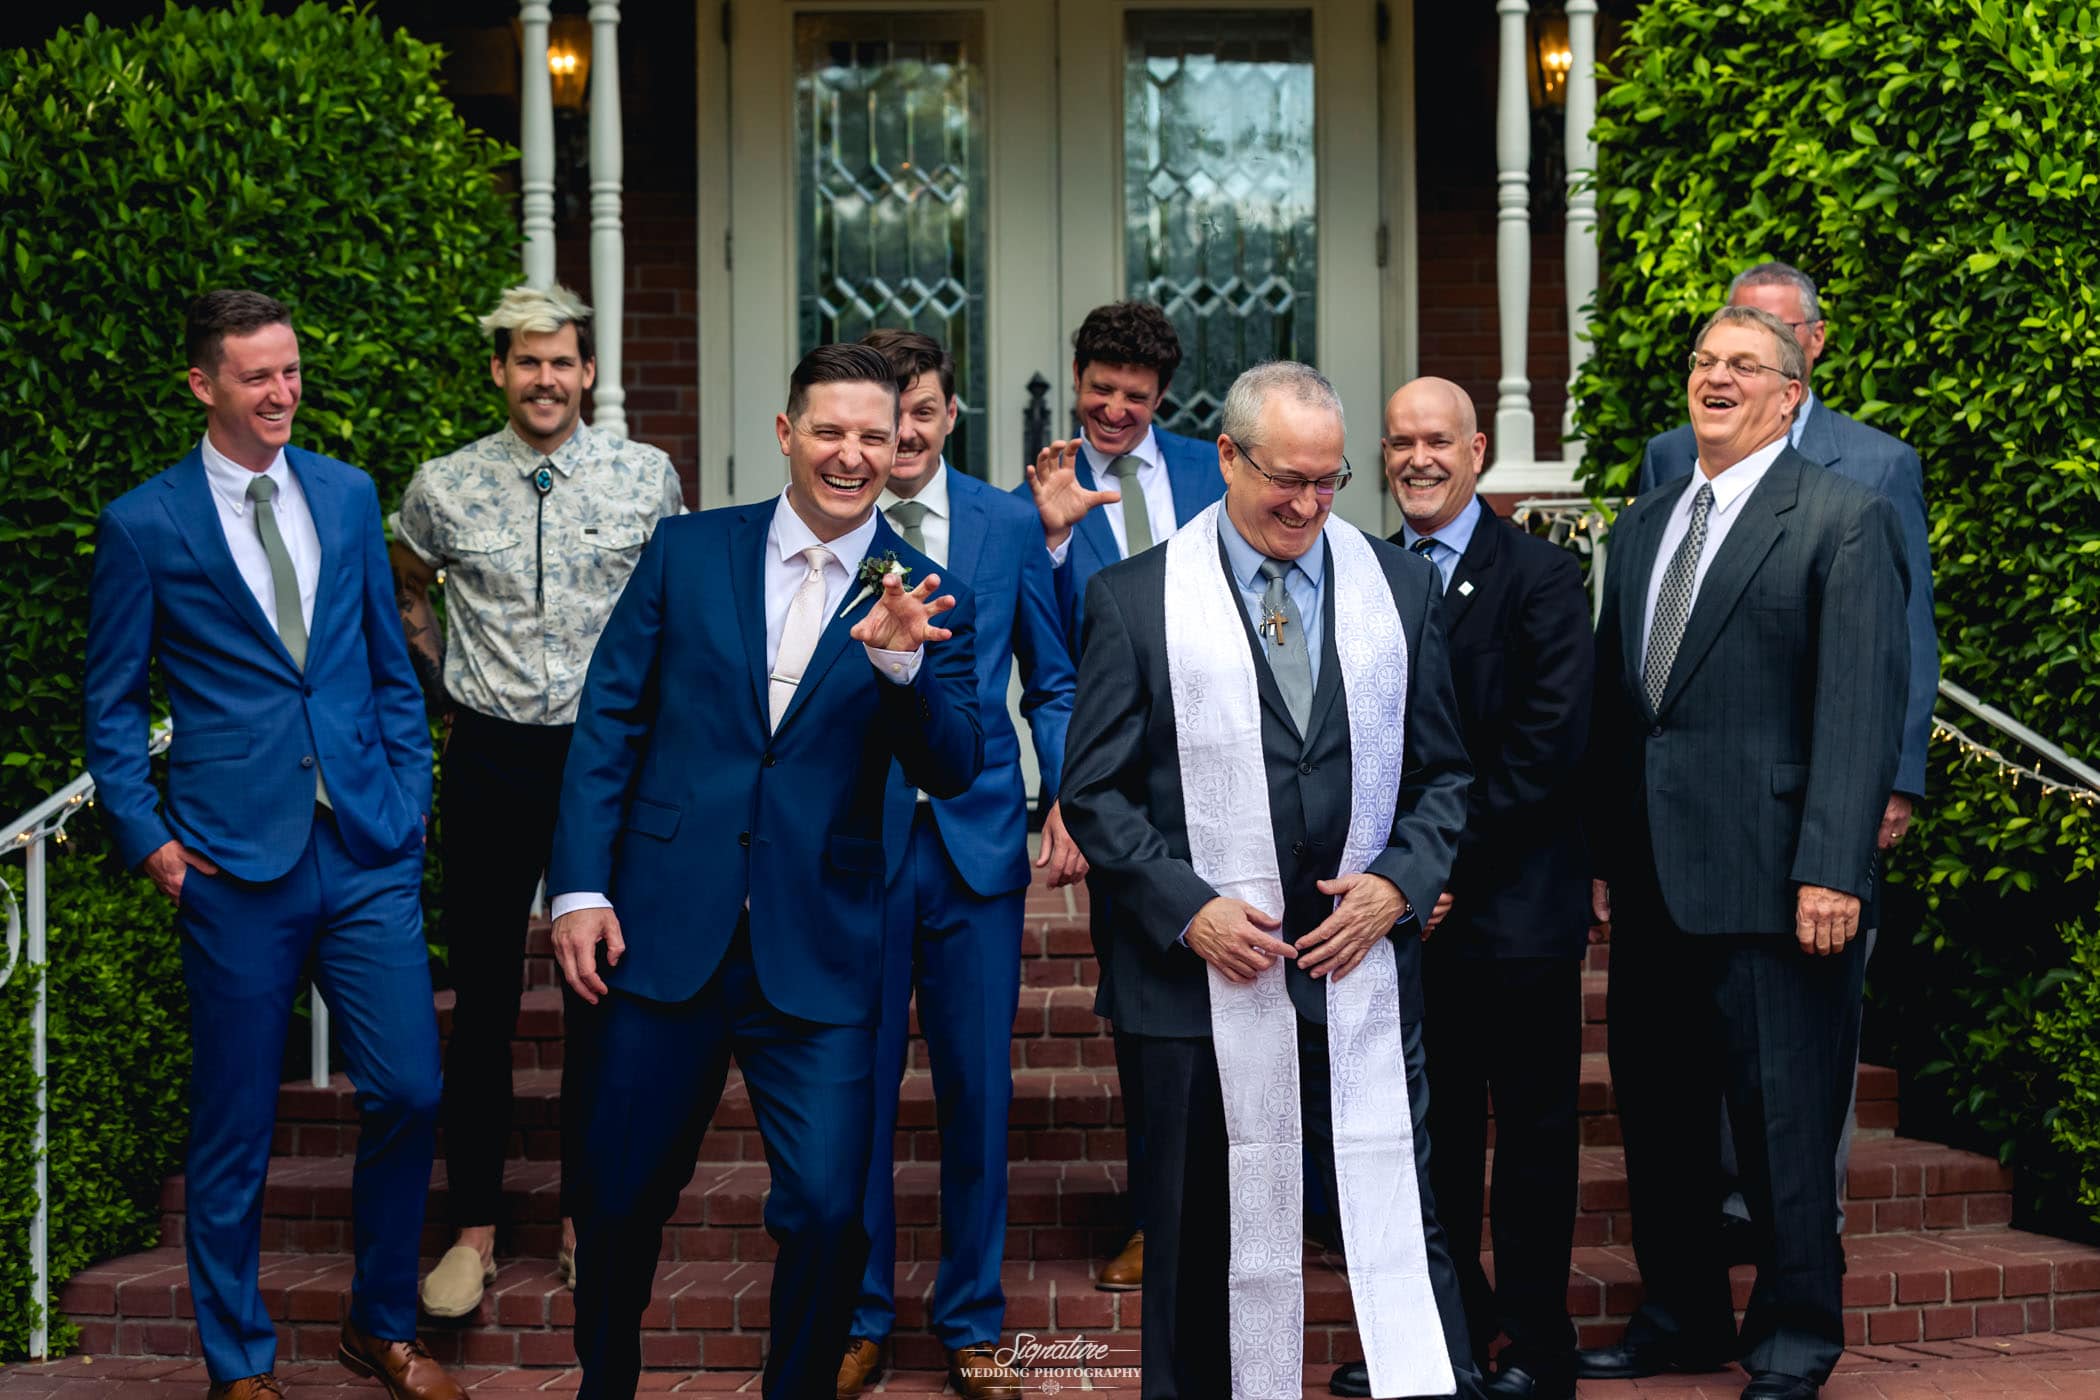 Fun picture of the men of the wedding